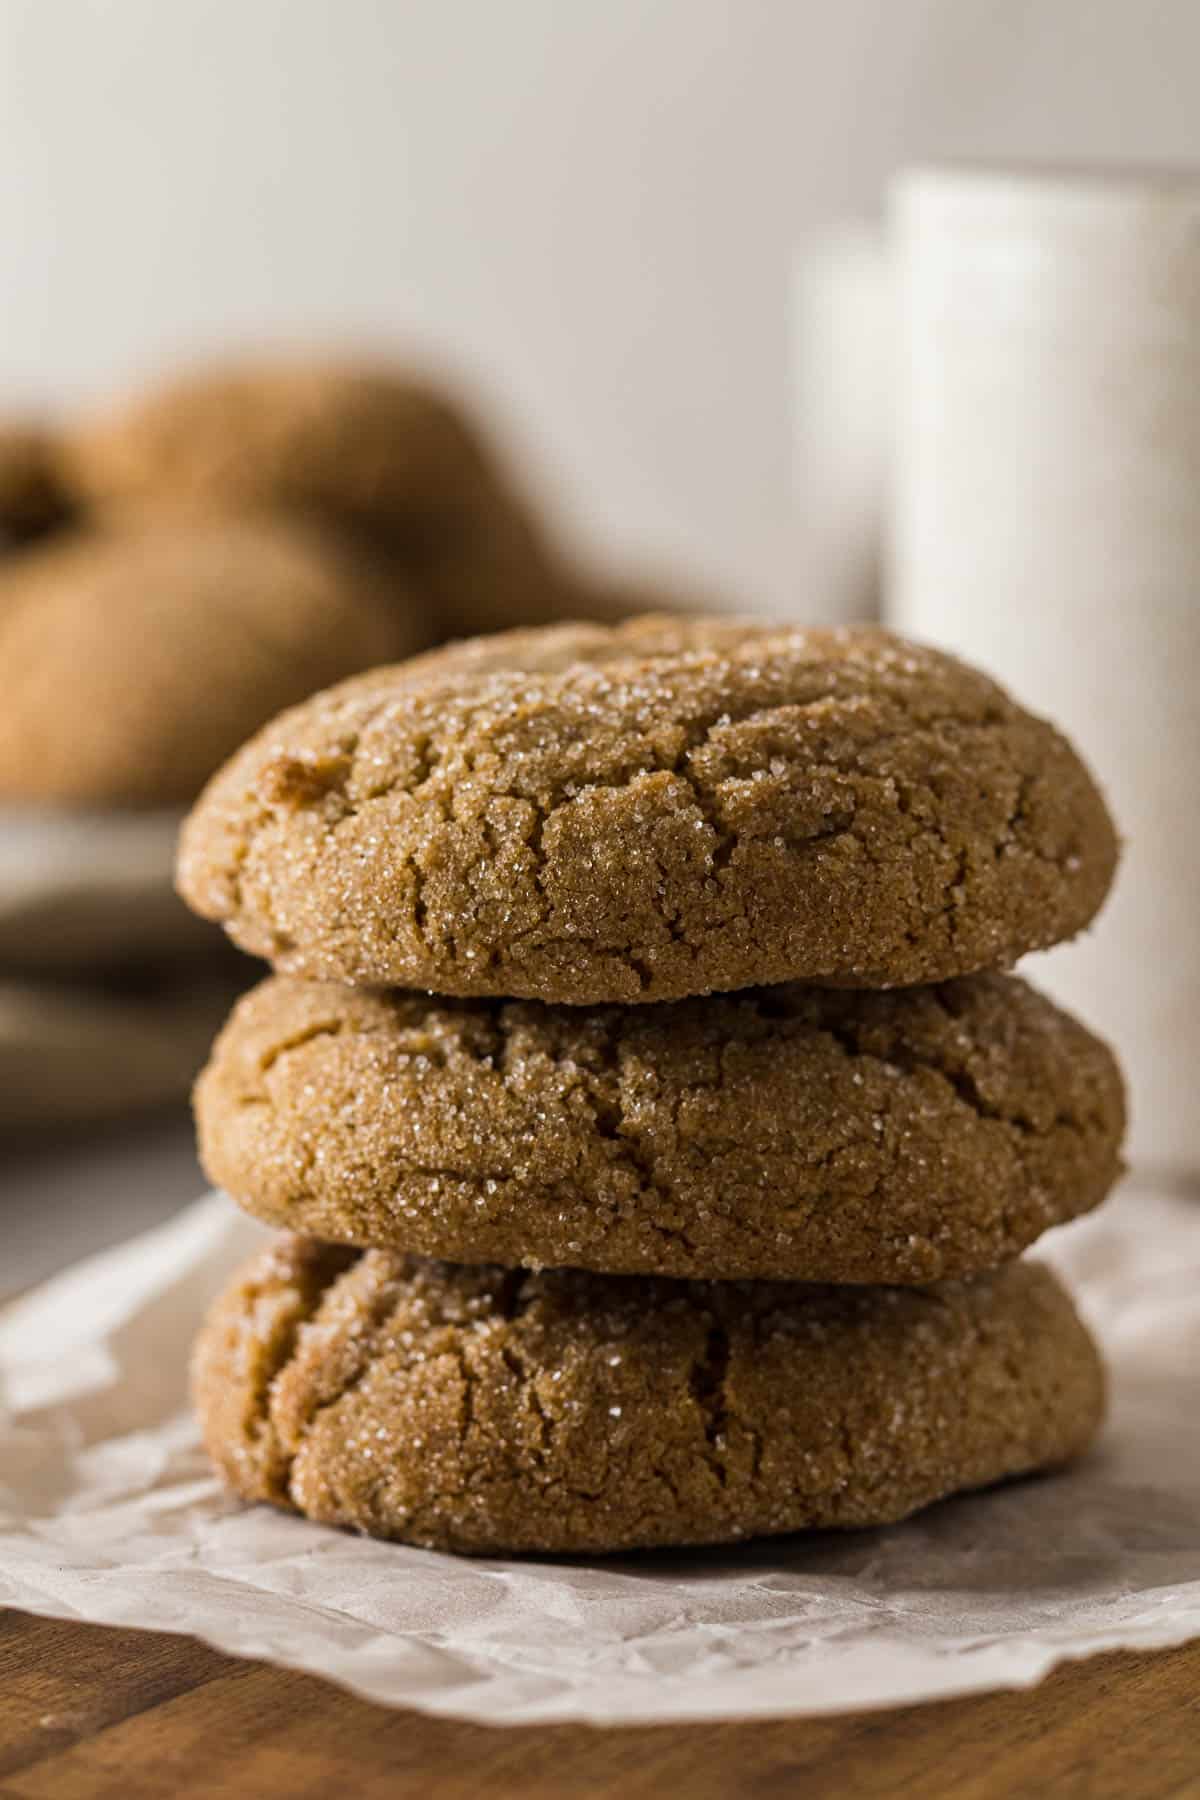 Ginger biscuits stacked on each other.